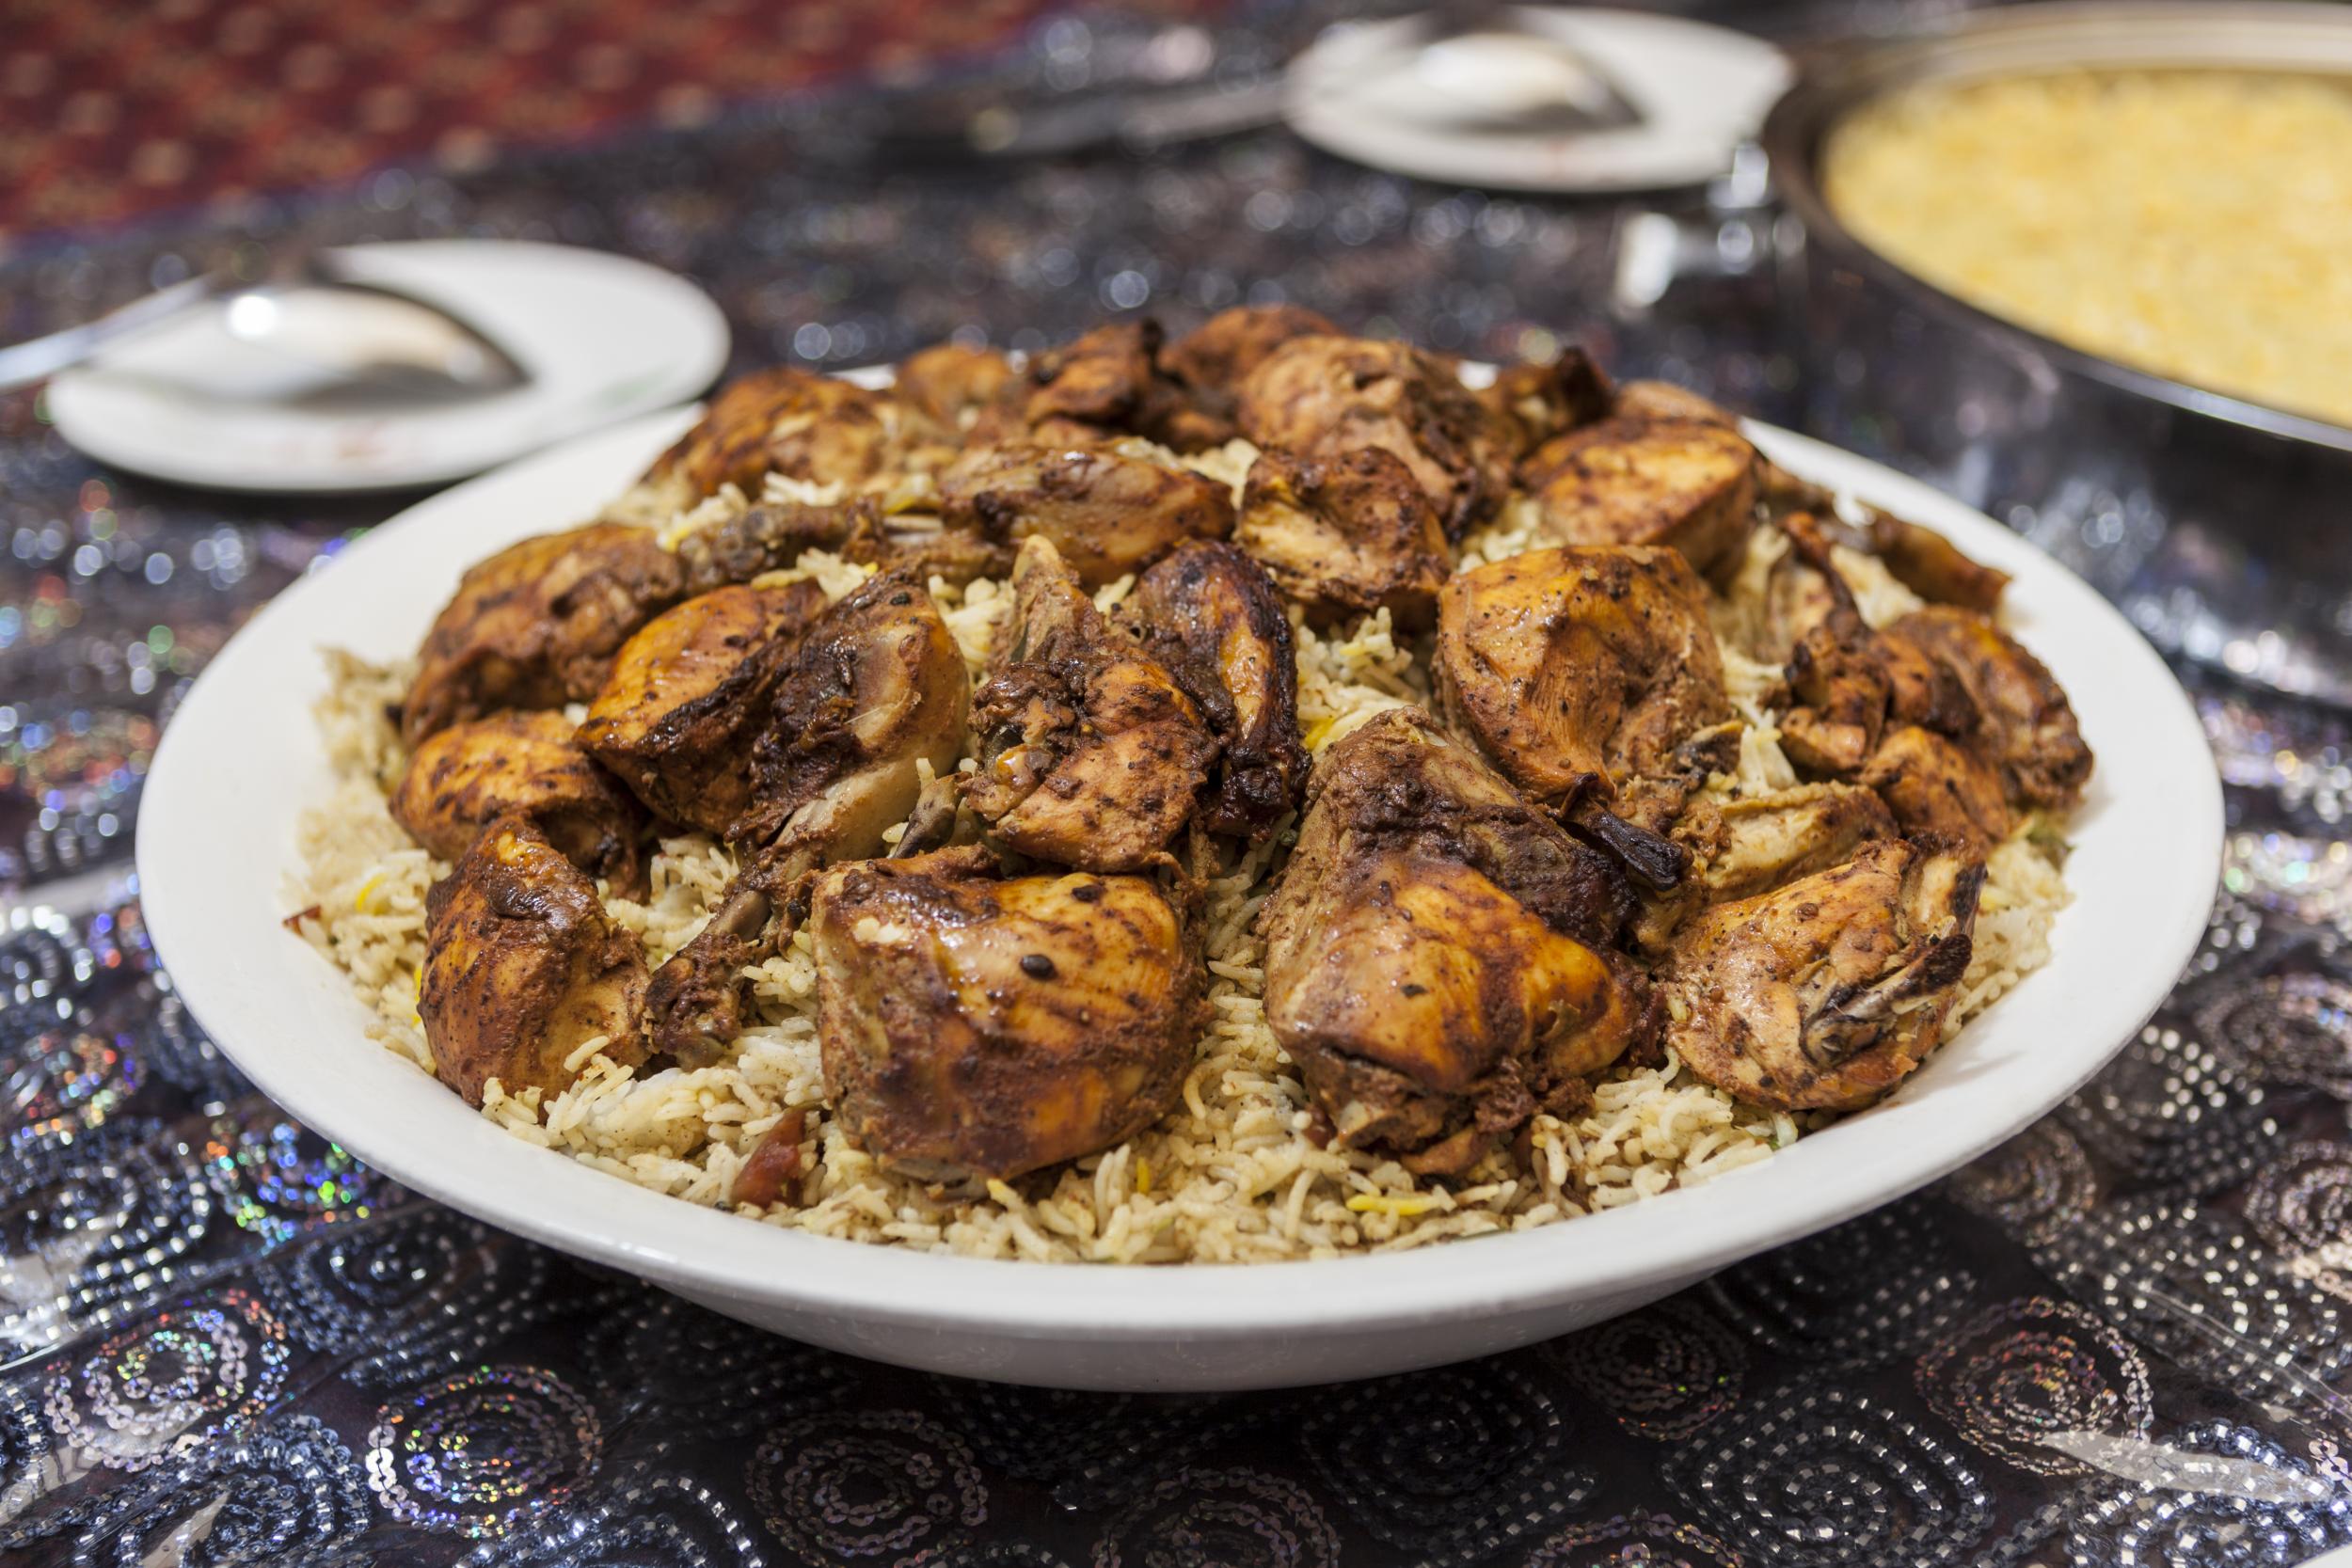 The woman served up her boyfriend's remains in a traditional Emirati dish